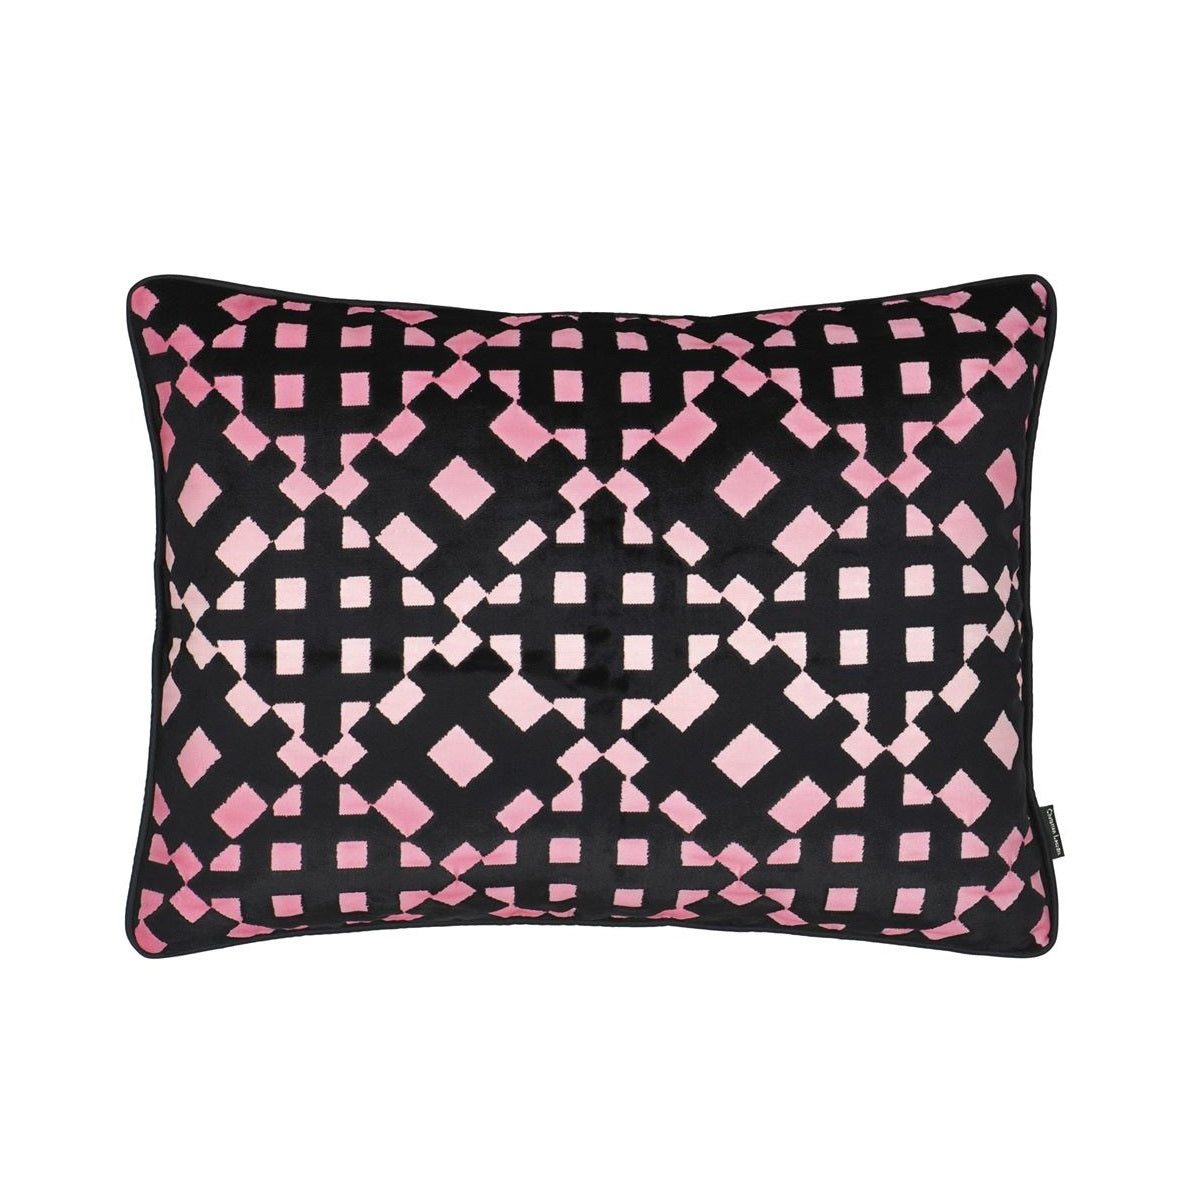 Double-sided pillow SOFT L'AVEU MAGENTA cotton satin